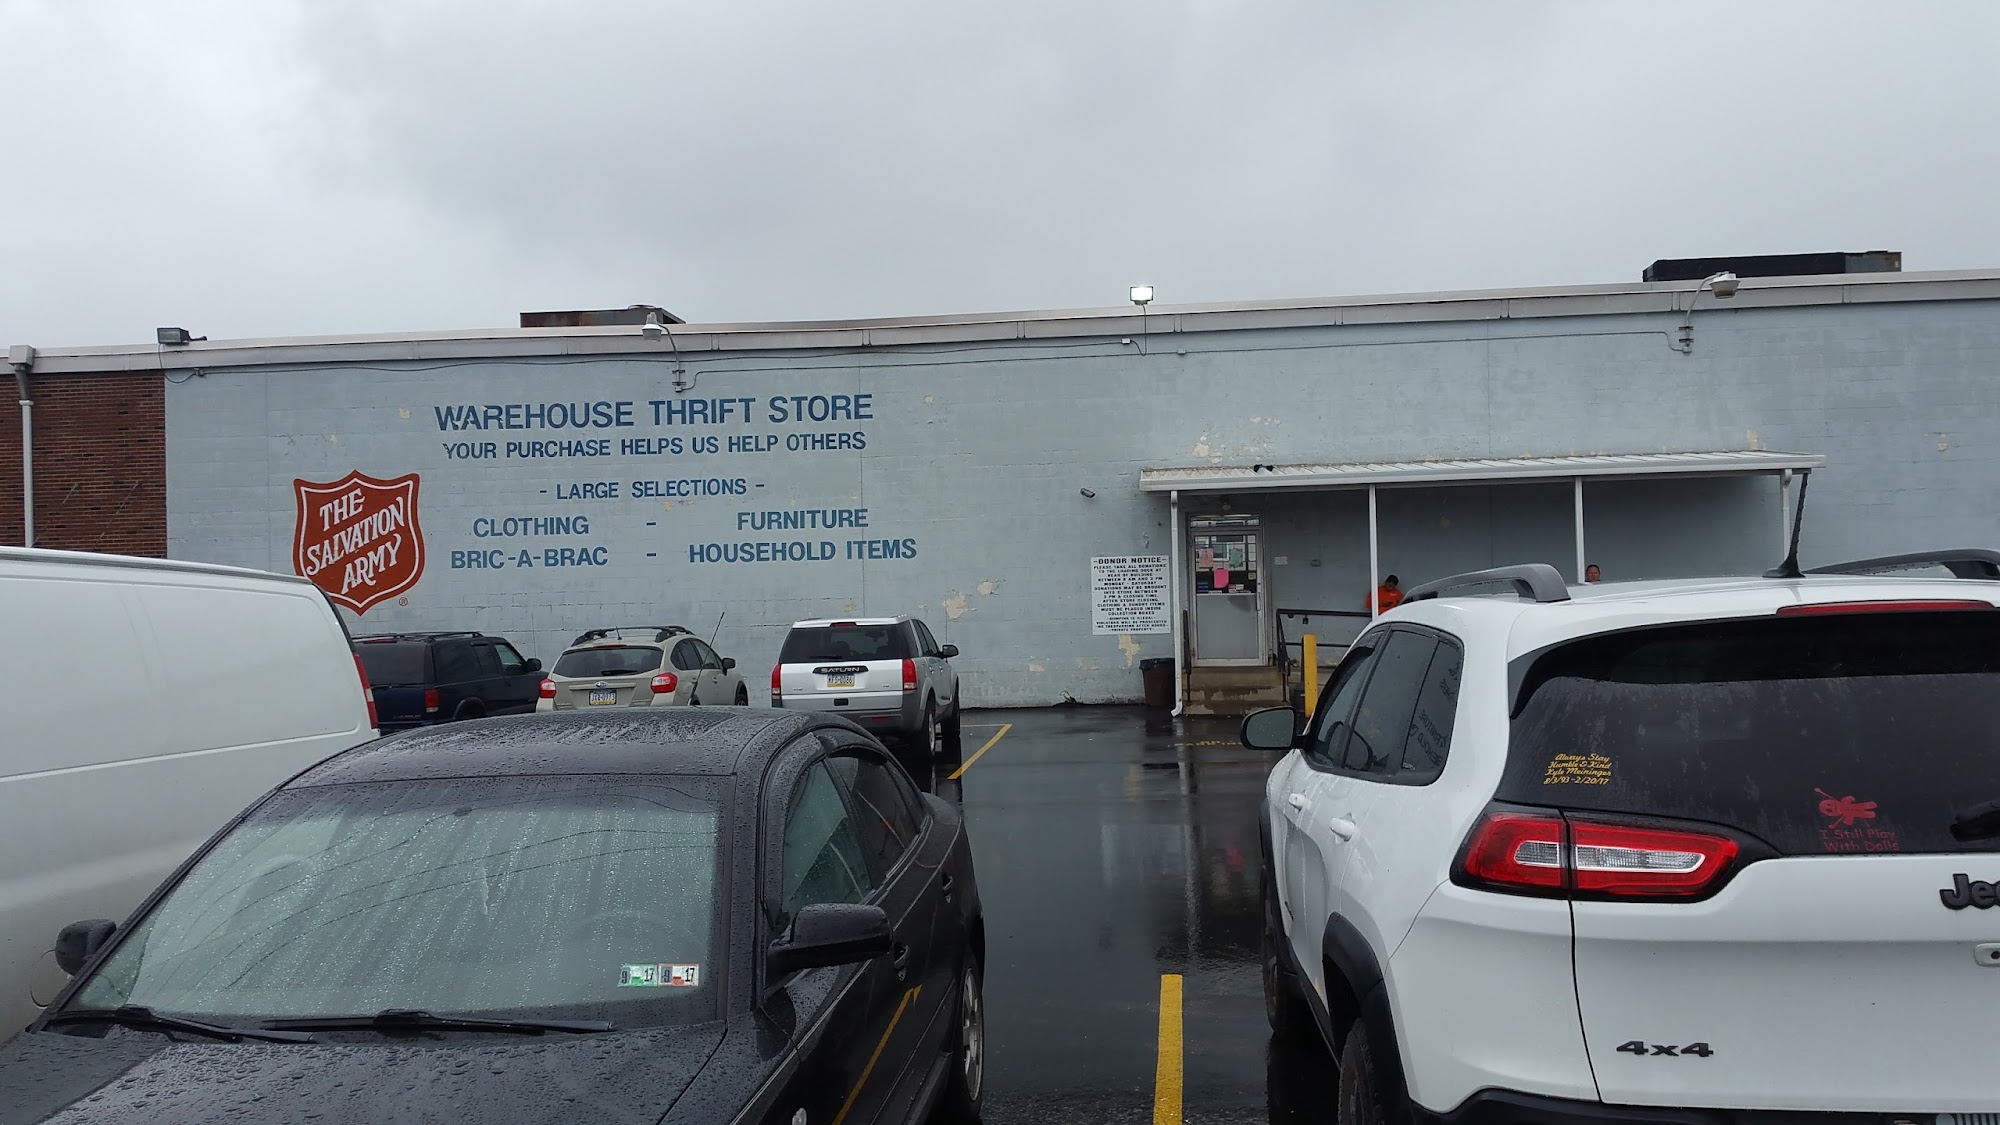 The Salvation Army Thrift Store Wilkes-Barre, PA